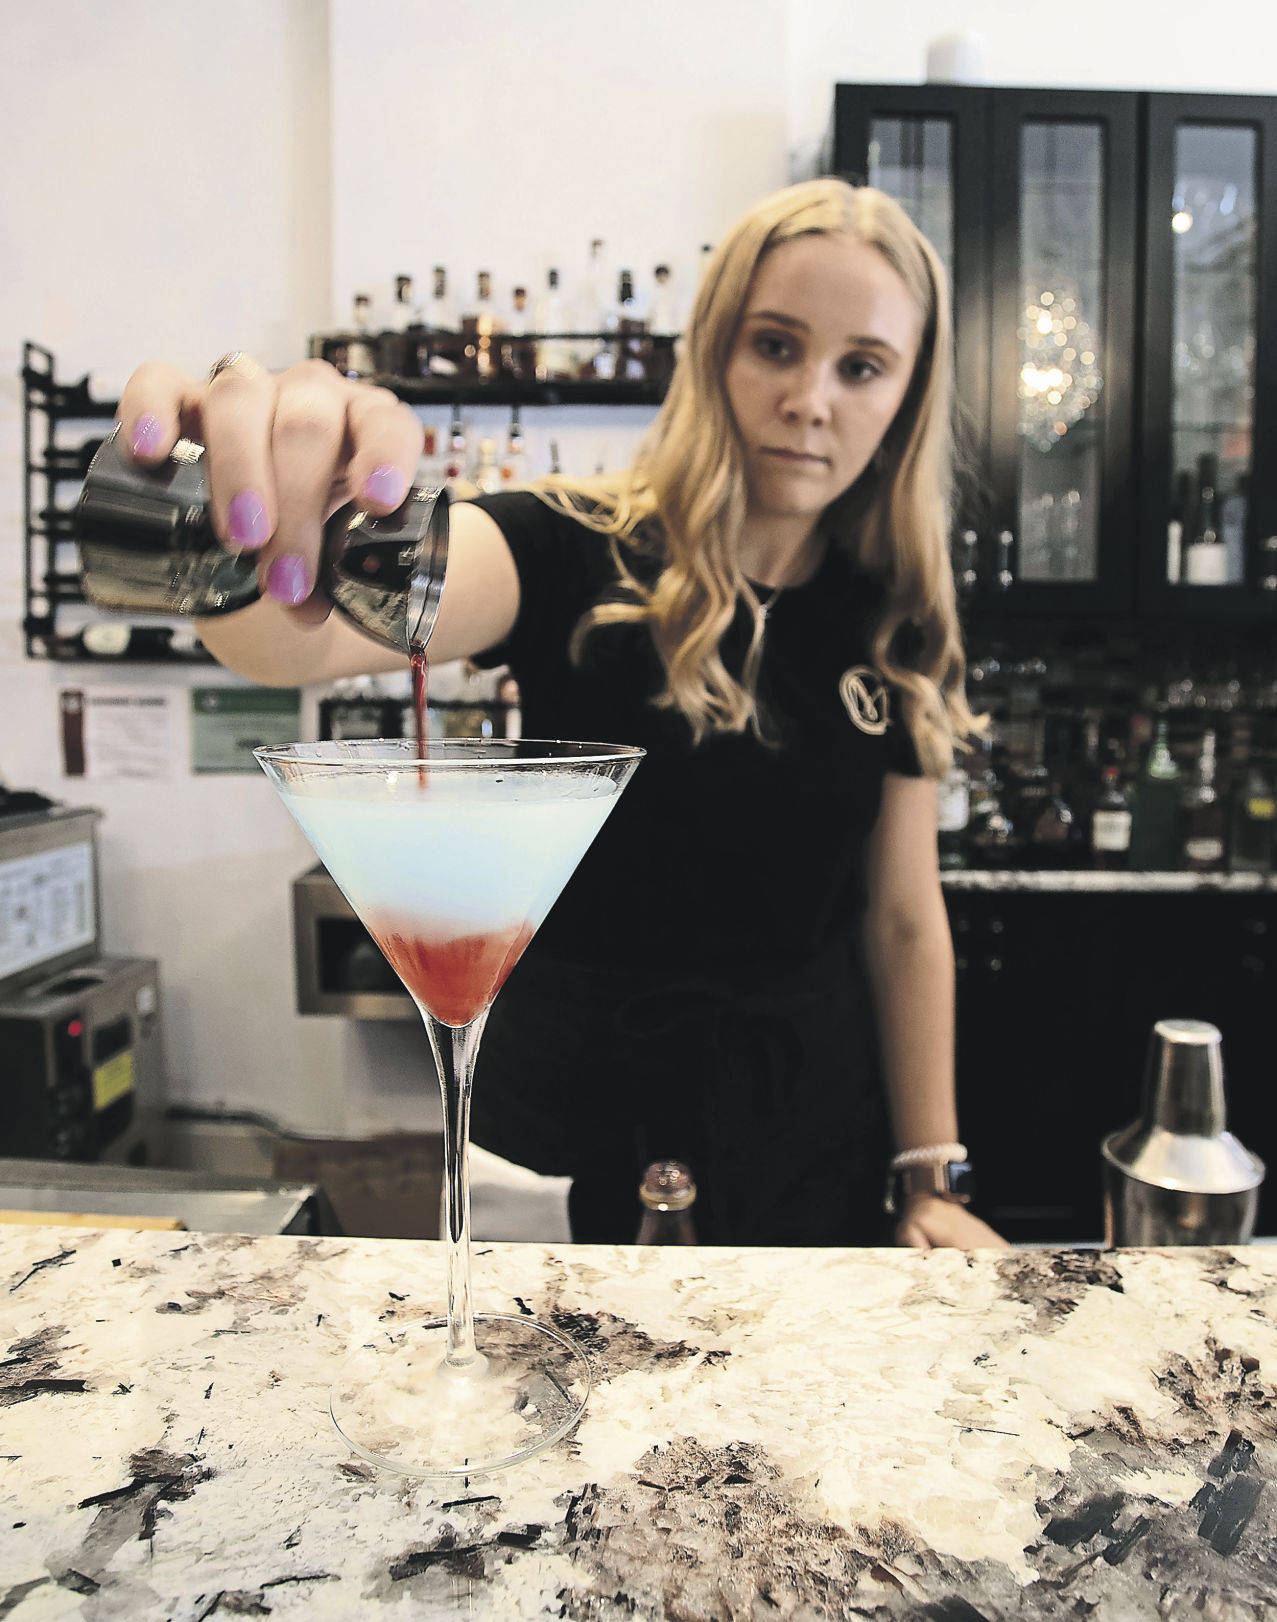 Bartender Lilly Streich pours a martini at Chanmpagne on Main in Galene, Ill., on Friday, July 16, 2021.    PHOTO CREDIT: SYSTEM